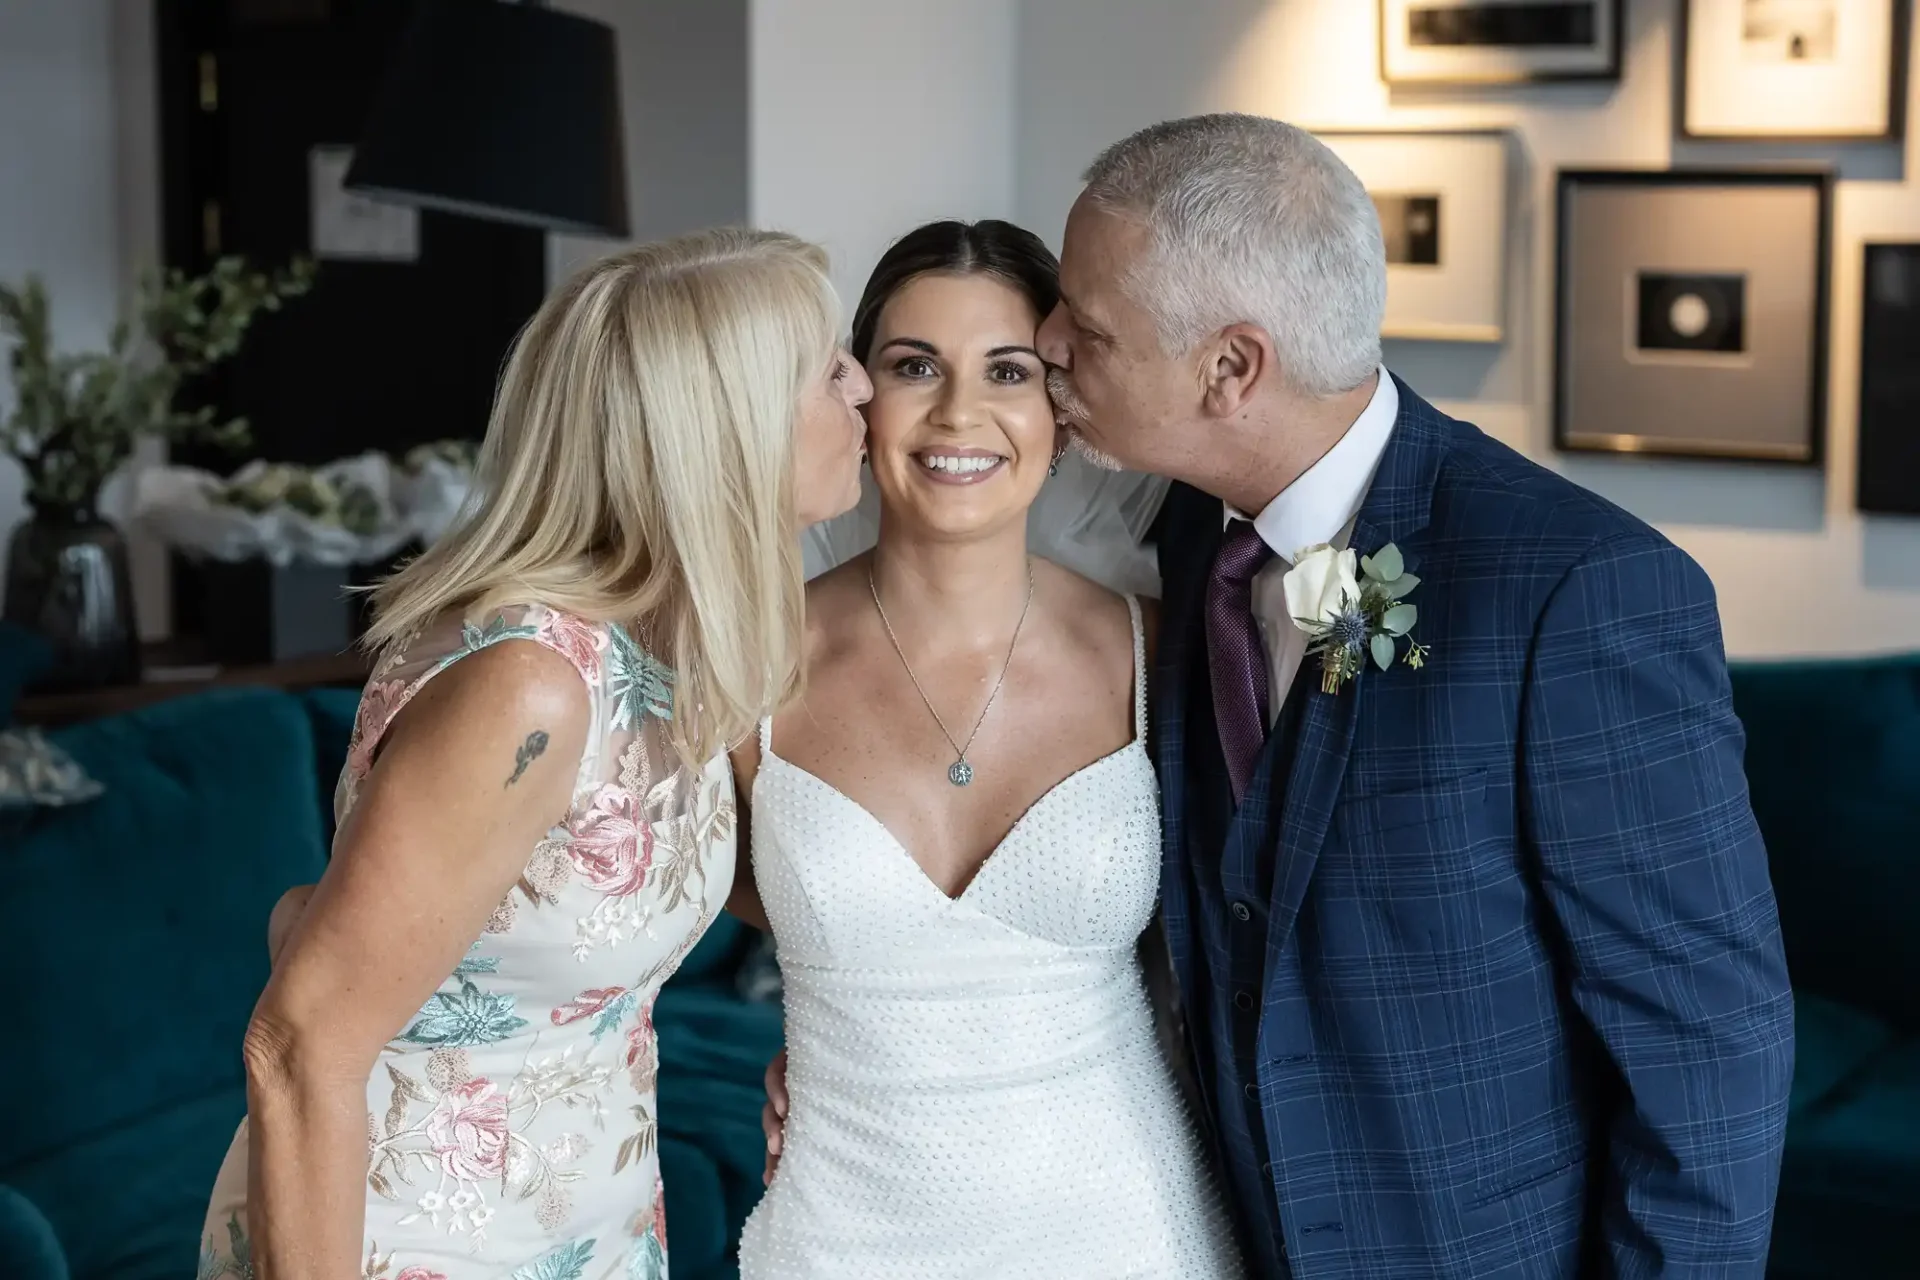 A bride smiling joyfully as her parents affectionately kiss her on each cheek in a decorated room.